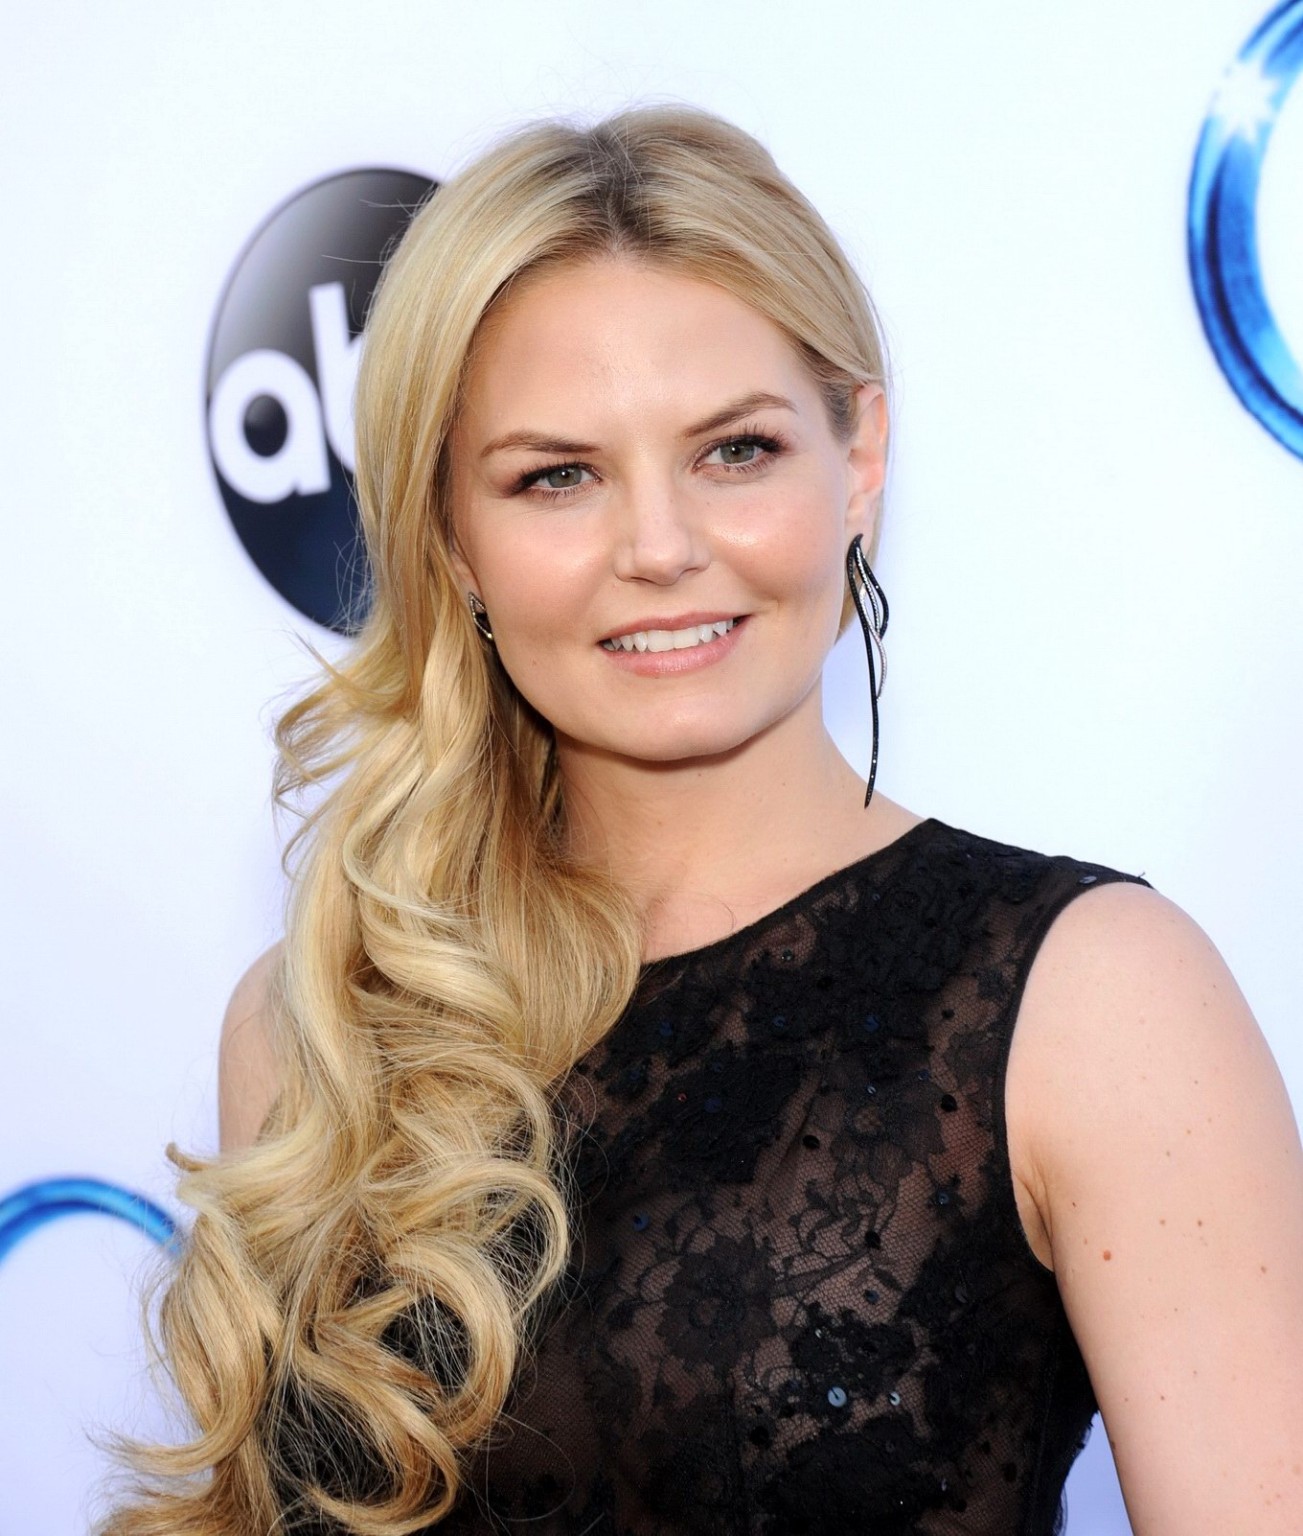 Jennifer Morrison shows off her boobs wearing a see through lace dress at the On #75185212